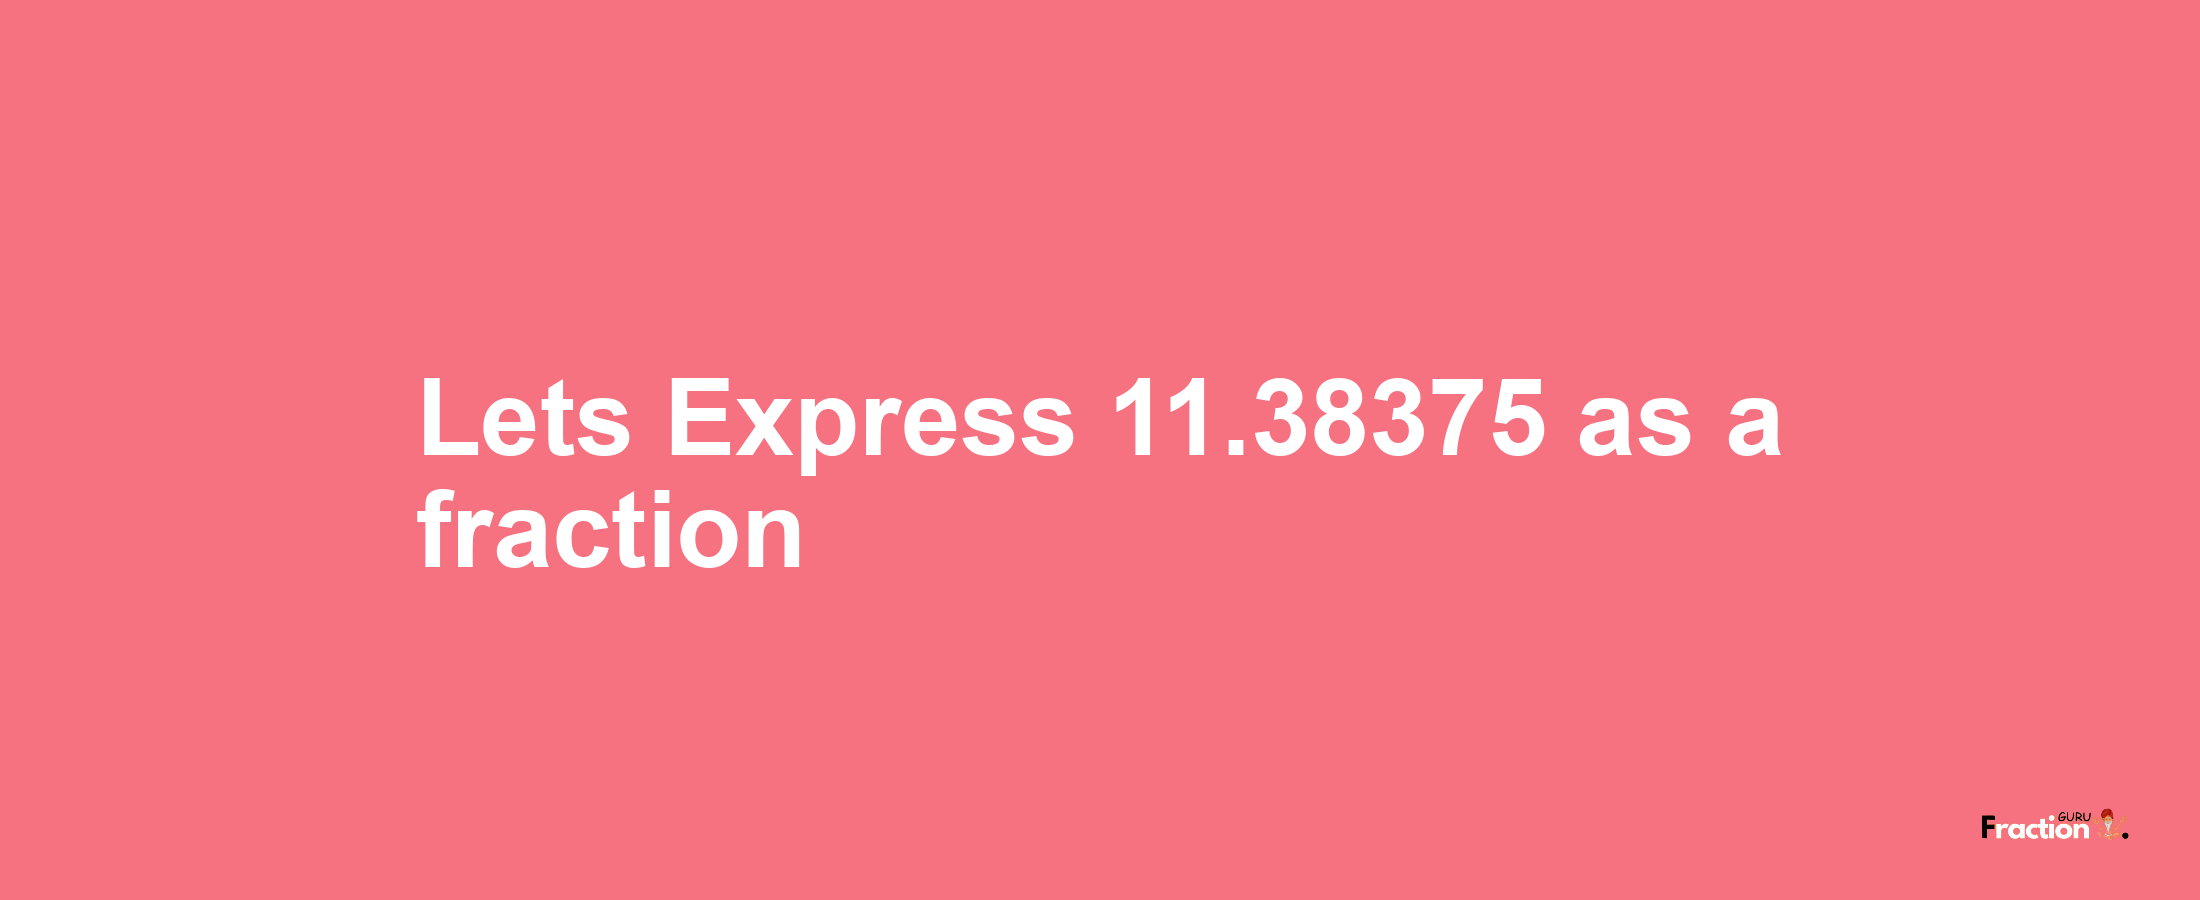 Lets Express 11.38375 as afraction